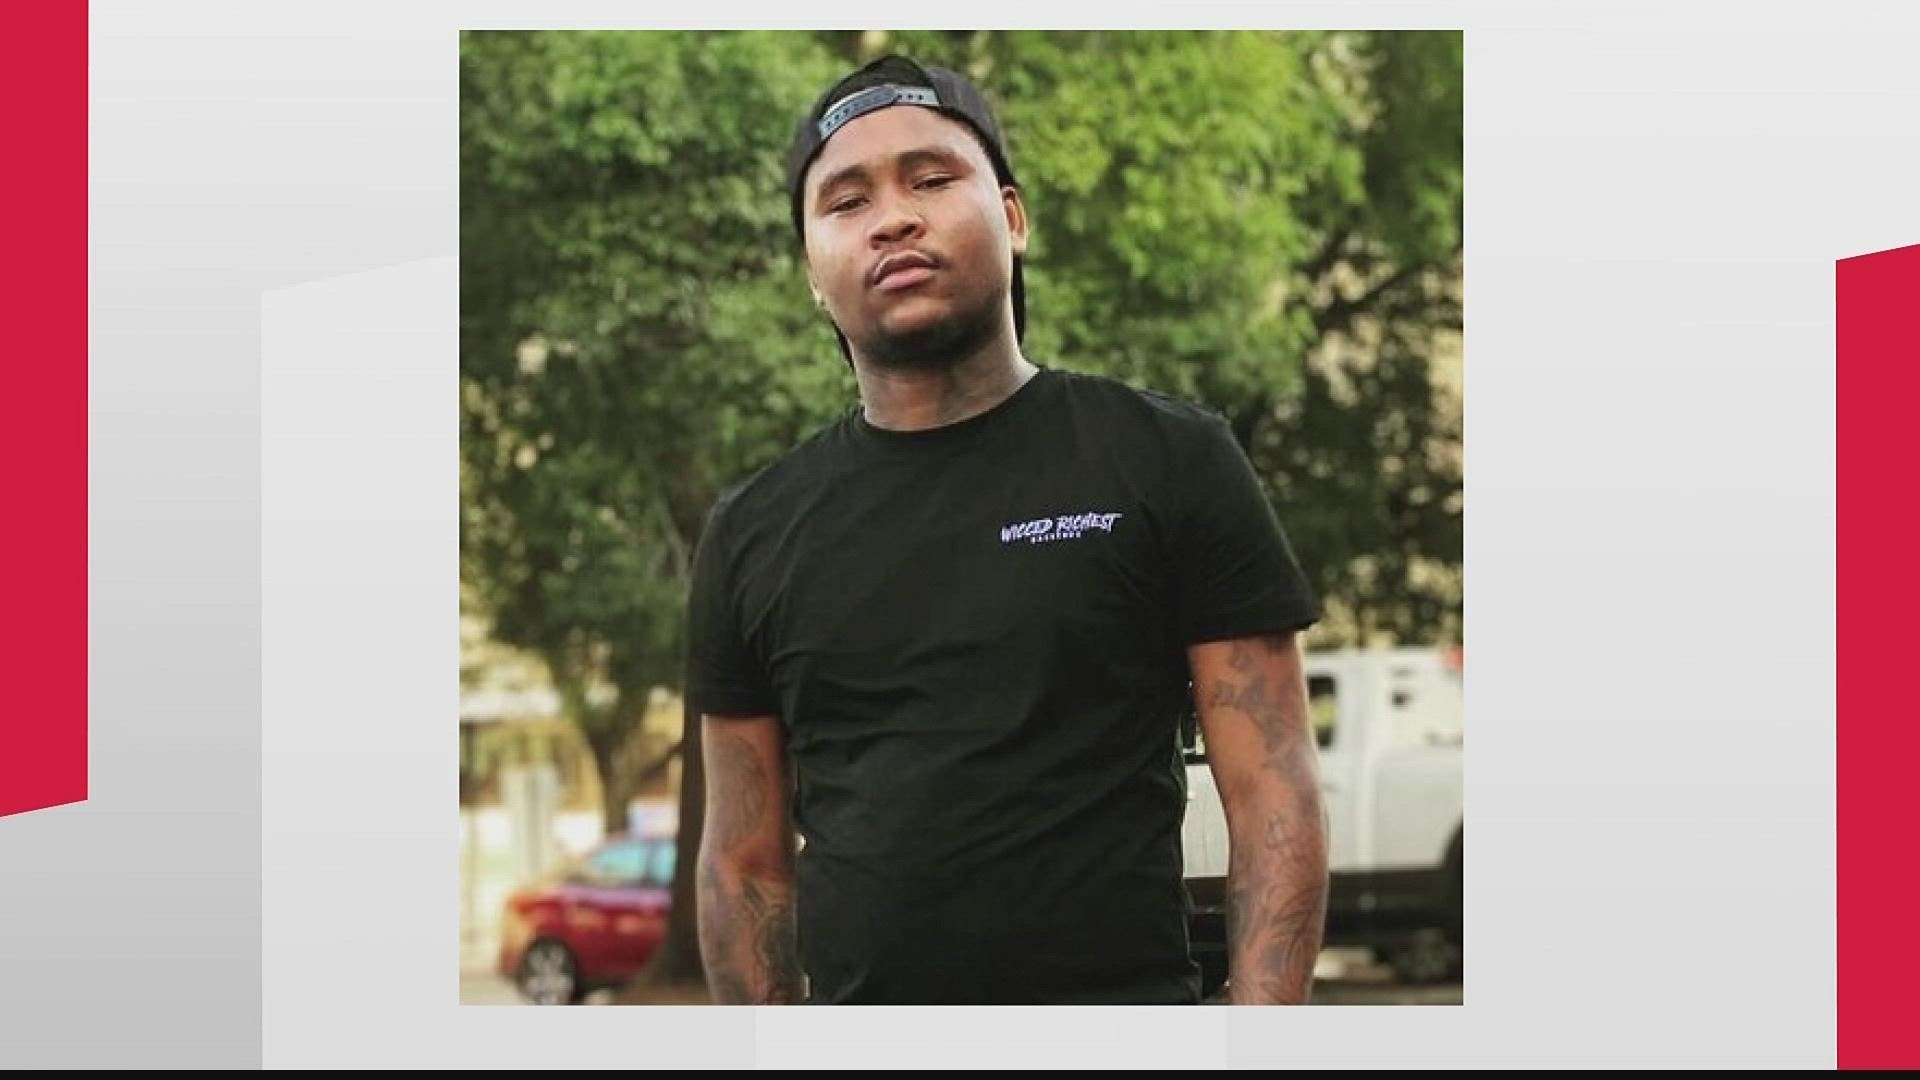 Atlanta Police are still looking for the person who shot and killed a 24-year-old father who his family said was walking a friend to her car when he was struck.